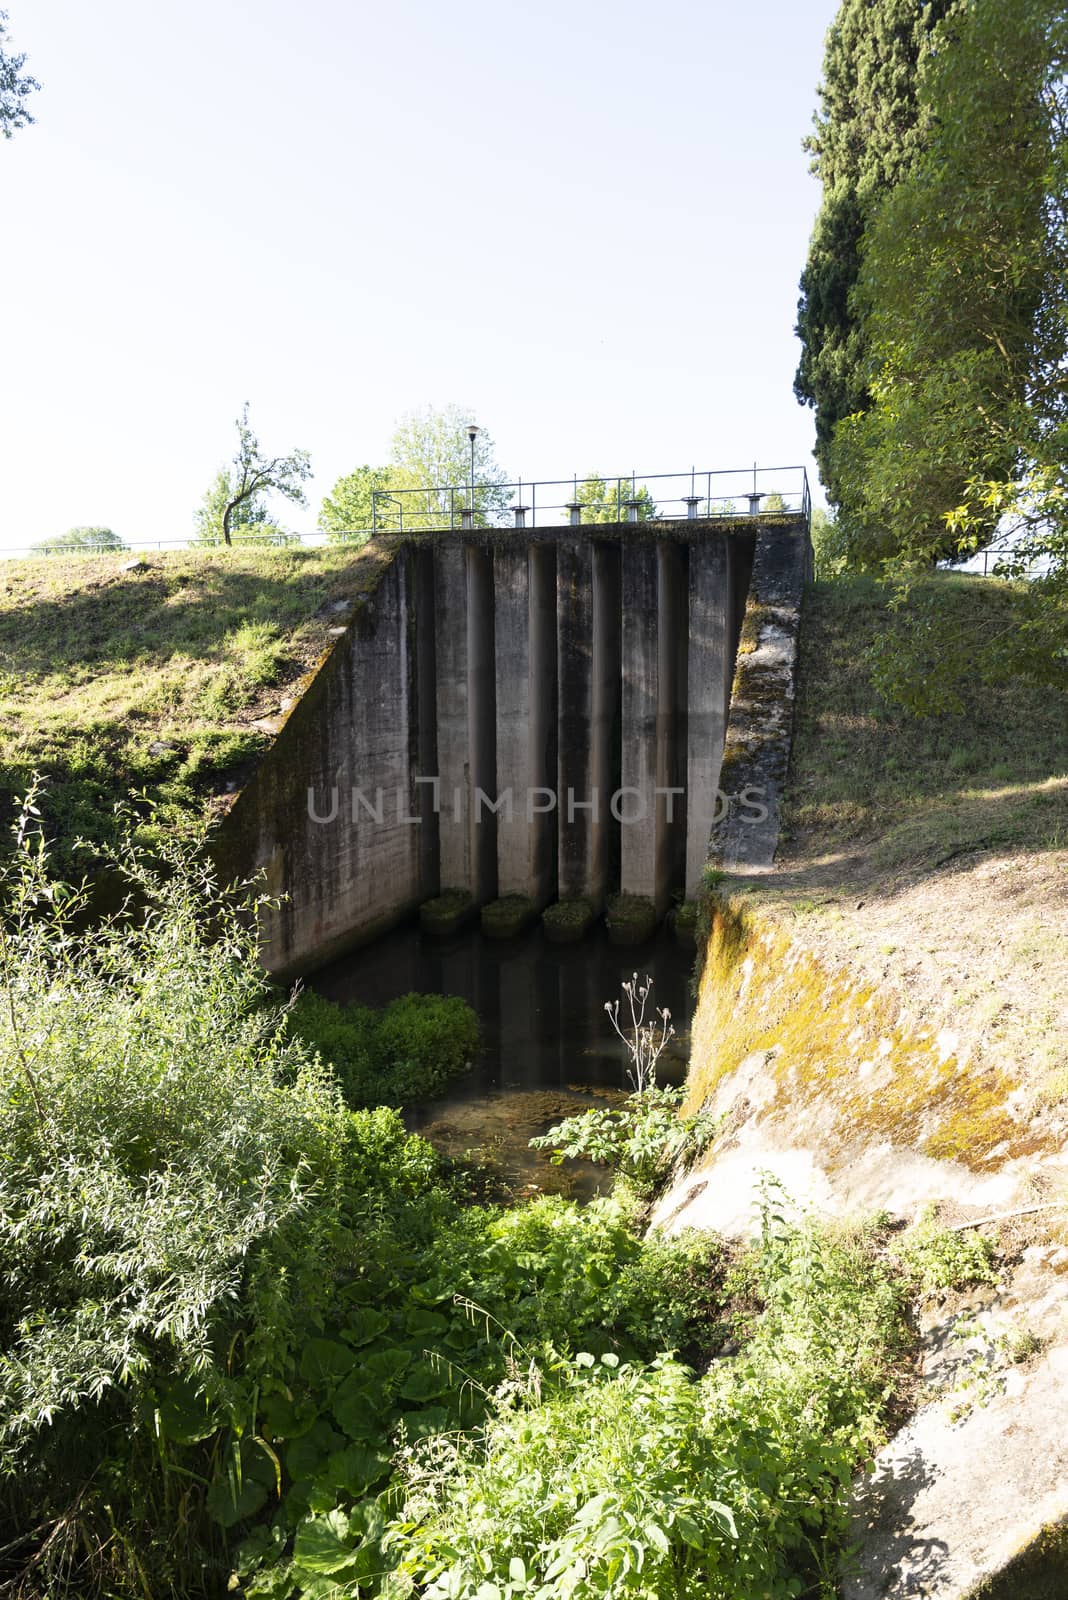 polymer dam in the province of terni by carfedeph